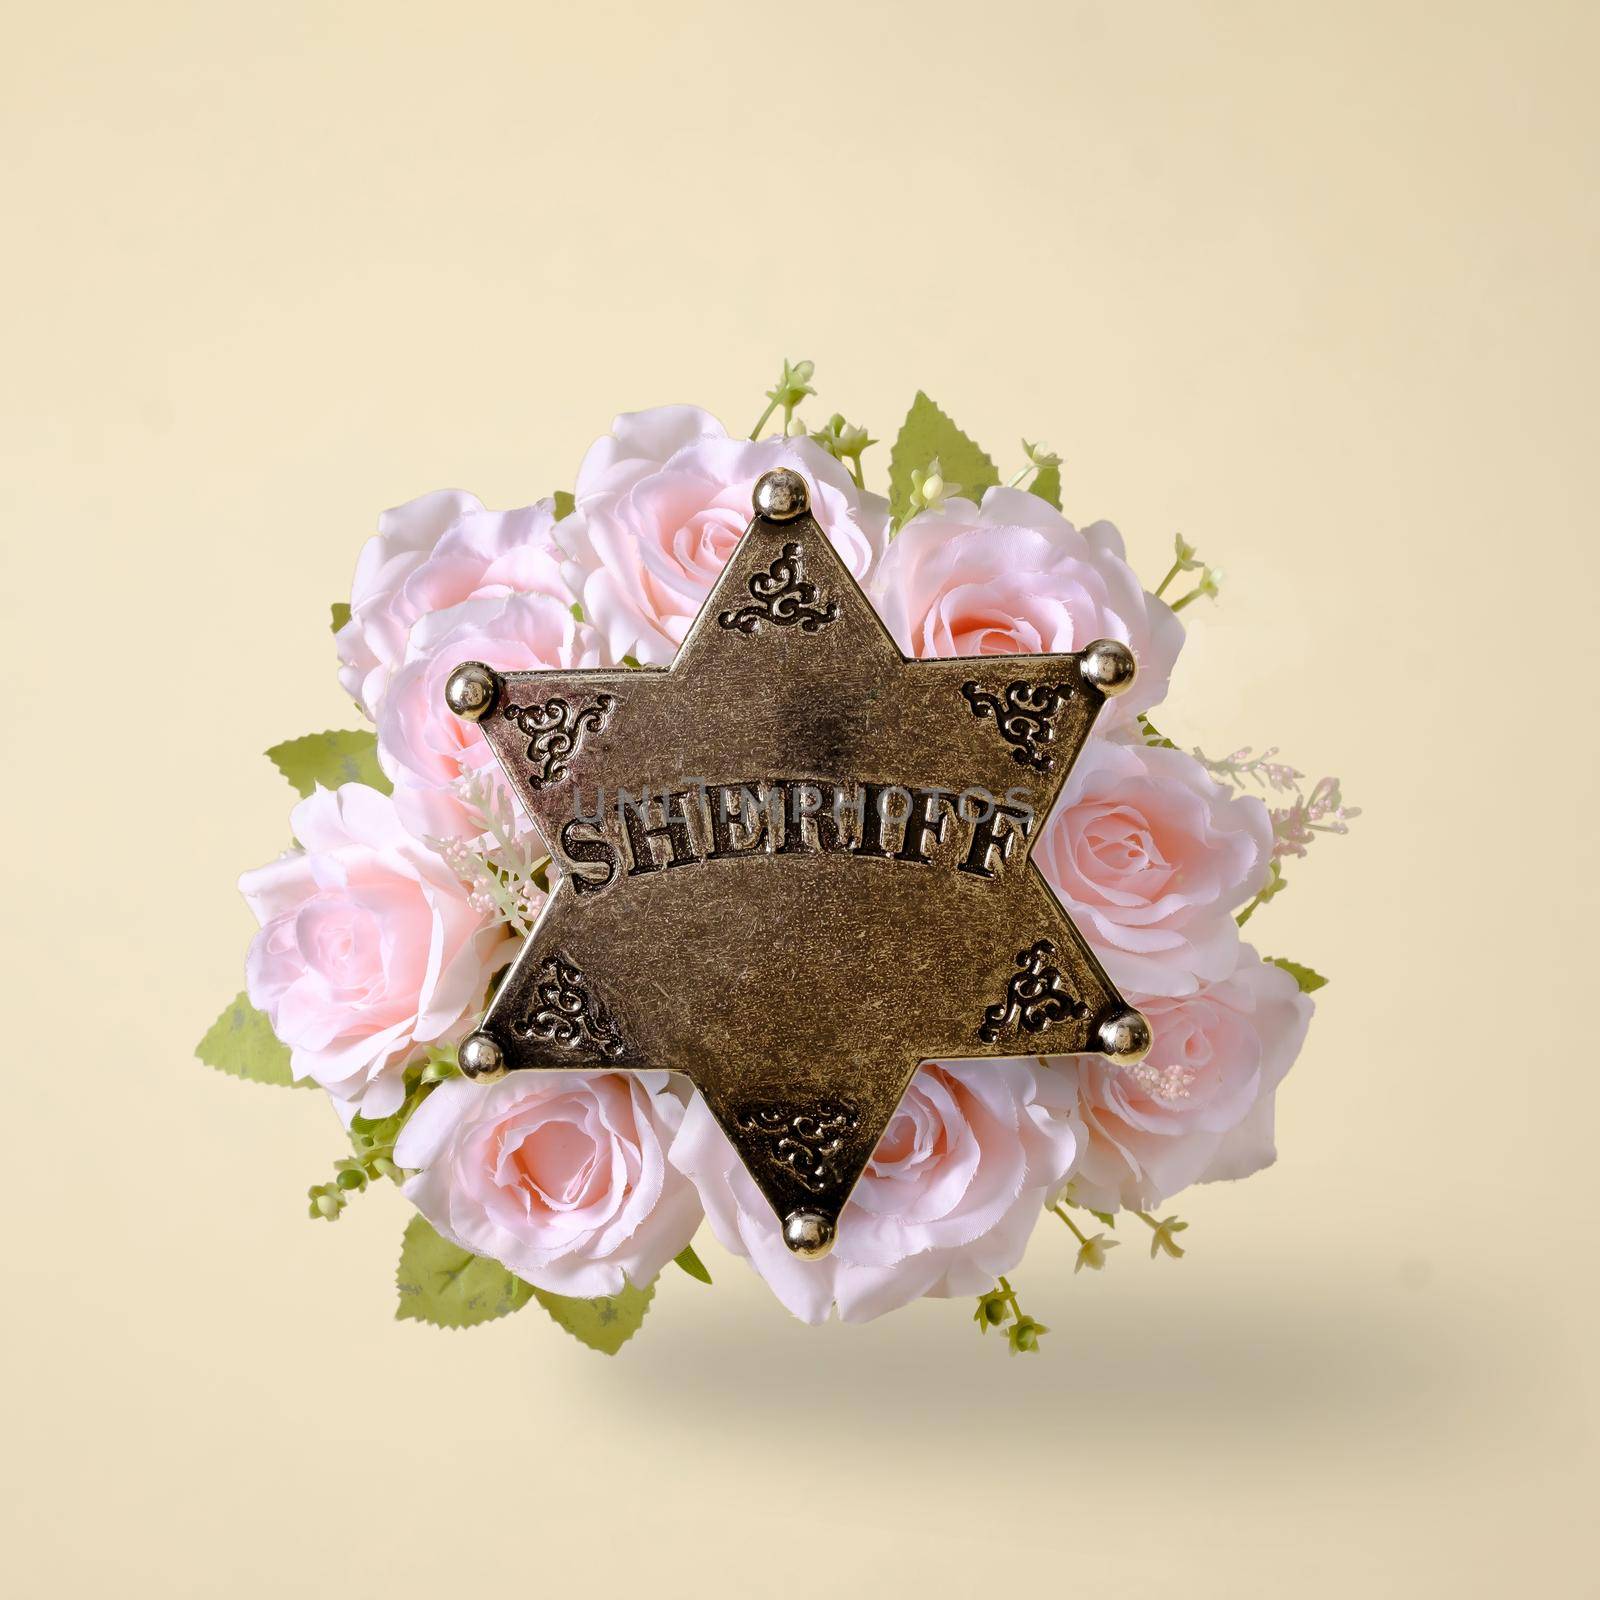 Star detective security america sheriff symbol of protecting the law in the wild west and a bouquet of rose flowers. Creative minimal concept.